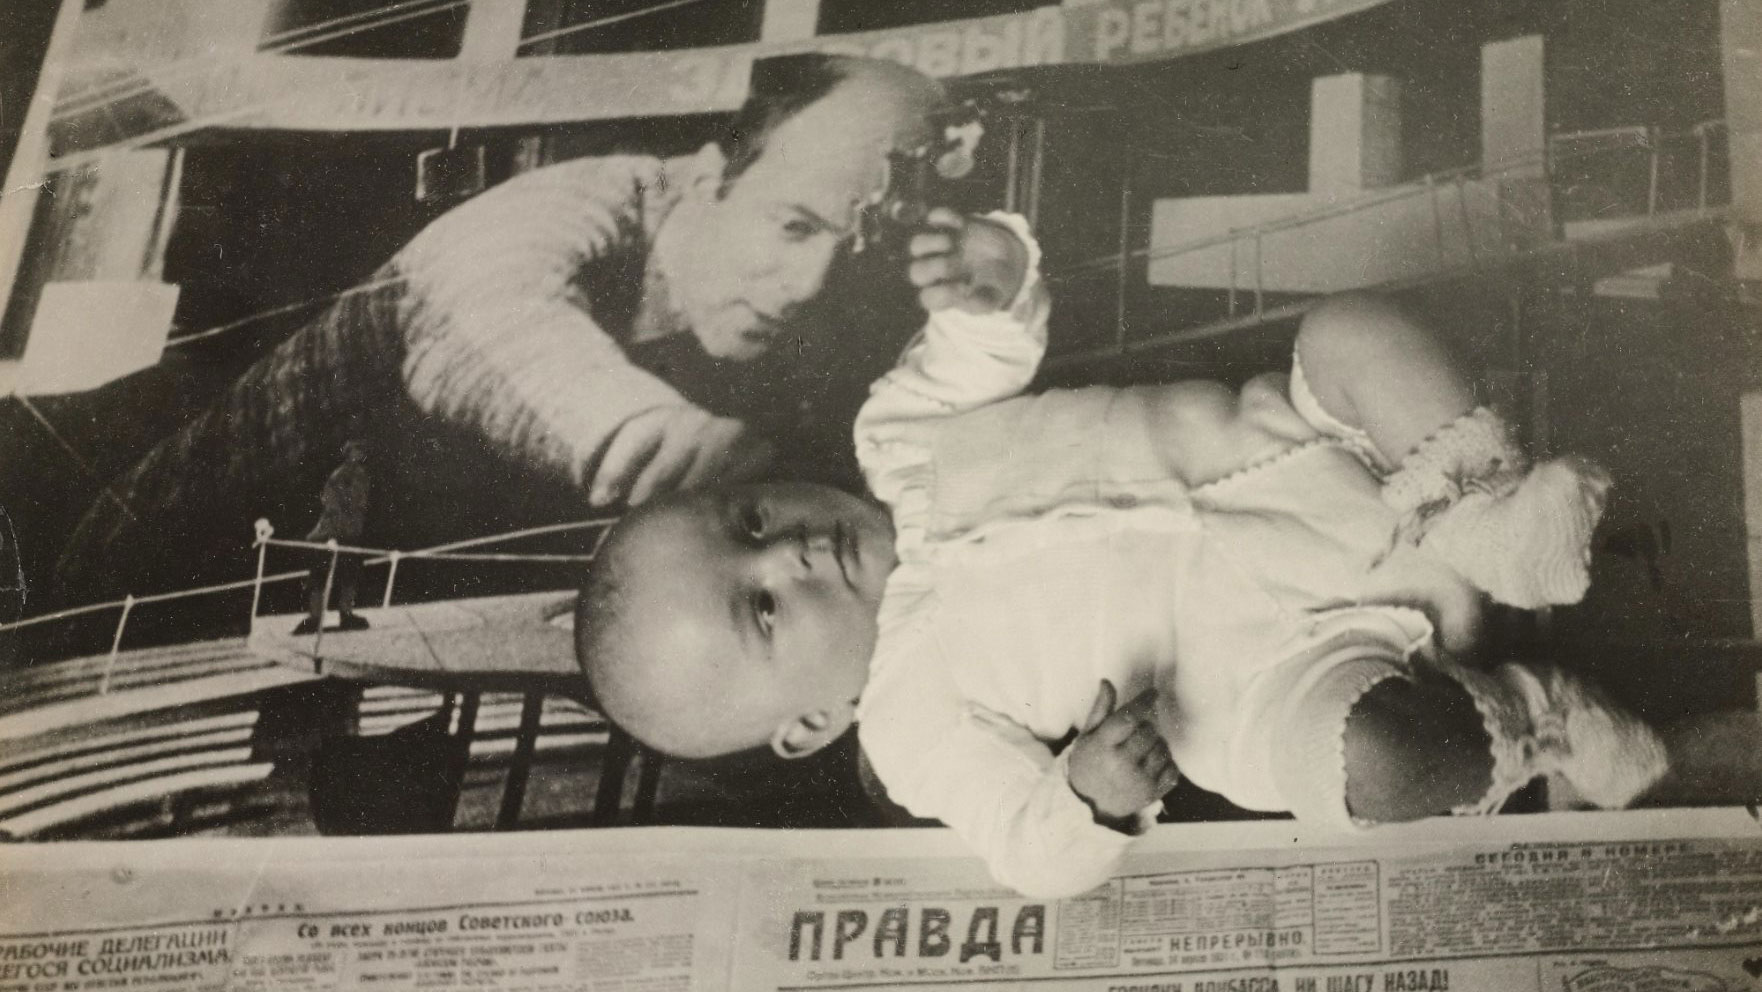 A vintage black and white Russian ad in a newspaper of a balding man reaching across a mechanical item. A baby wearing a sweater and booties is laying on top of the paper.  